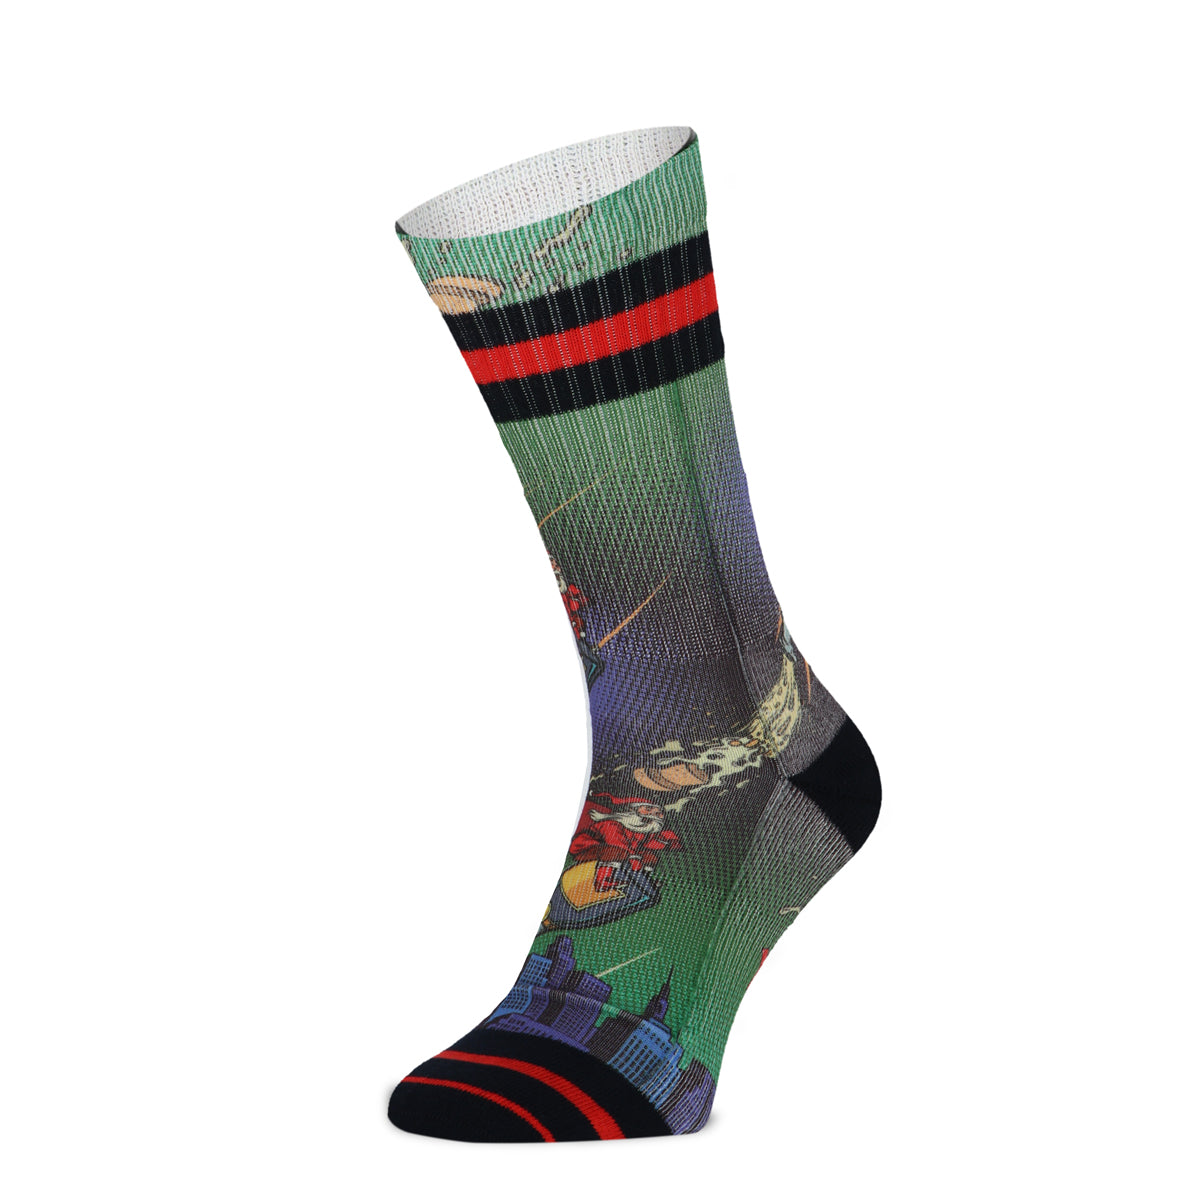 Xmas Popping Space chaussettes pour hommes